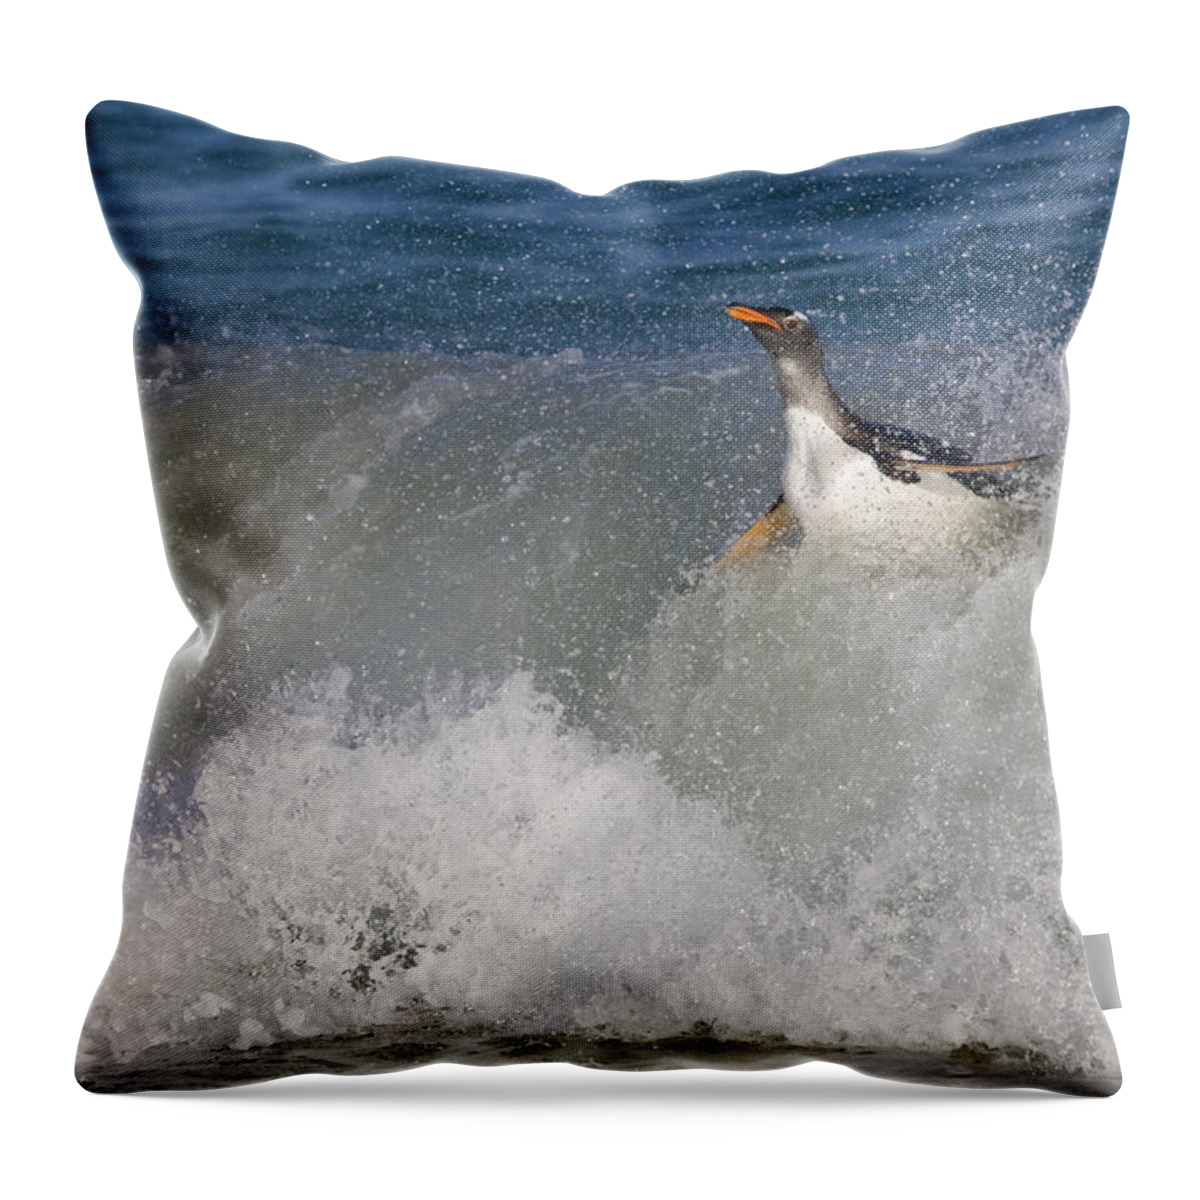 Flpa Throw Pillow featuring the photograph Gentoo Penguin In Breaking Wave New by Dickie Duckett